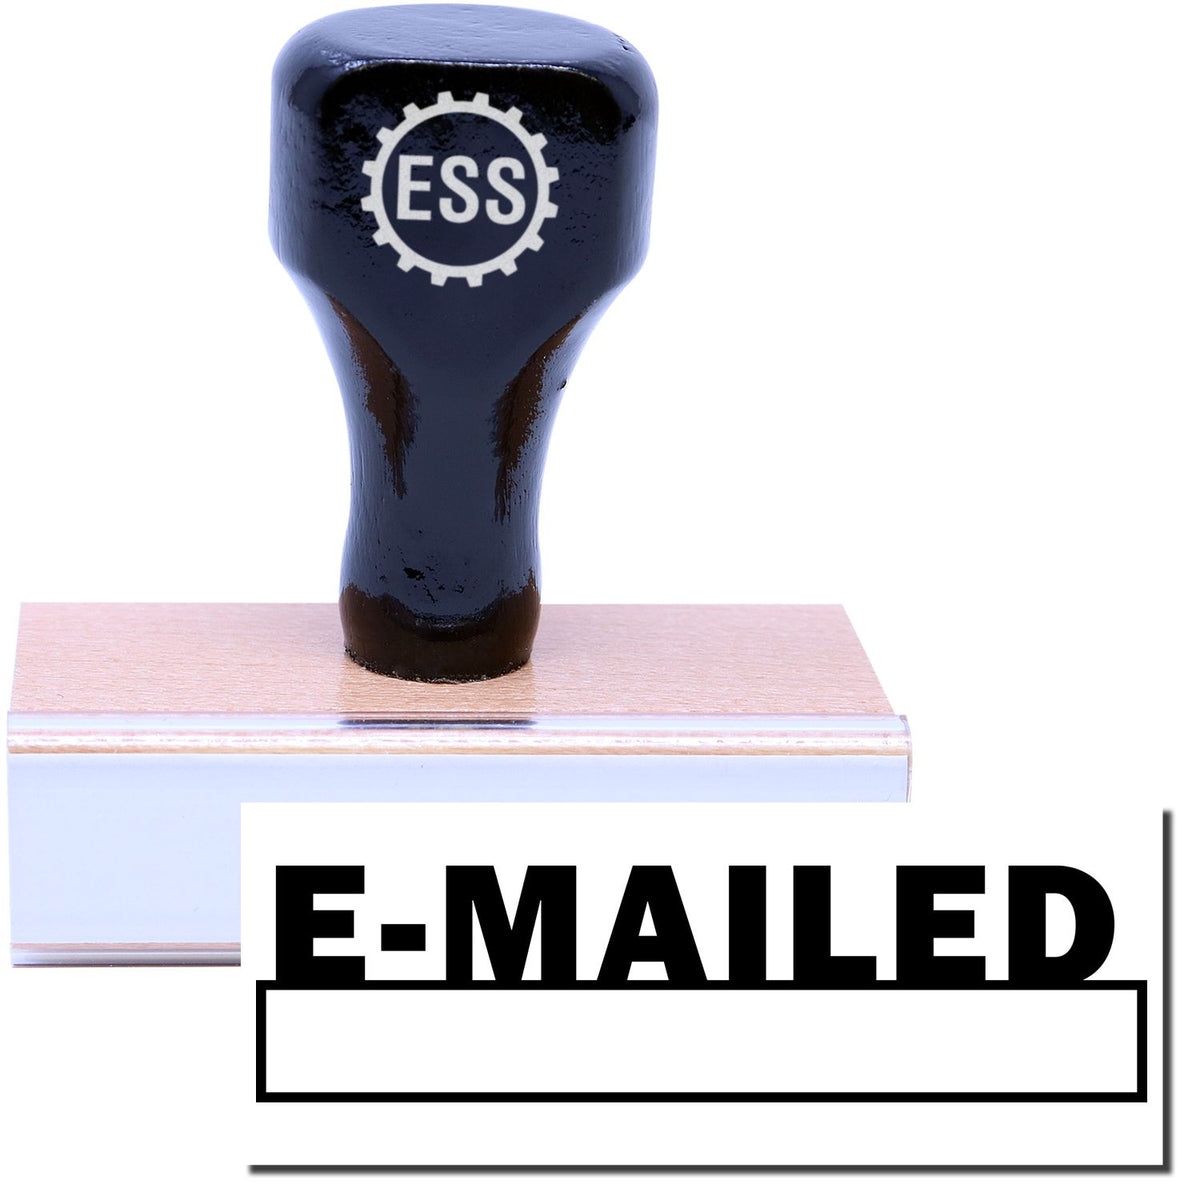 A stock office rubber stamp with a stamped image showing how the text &quot;E-MAILED&quot; in a large font with a date box underneath the text is displayed after stamping.